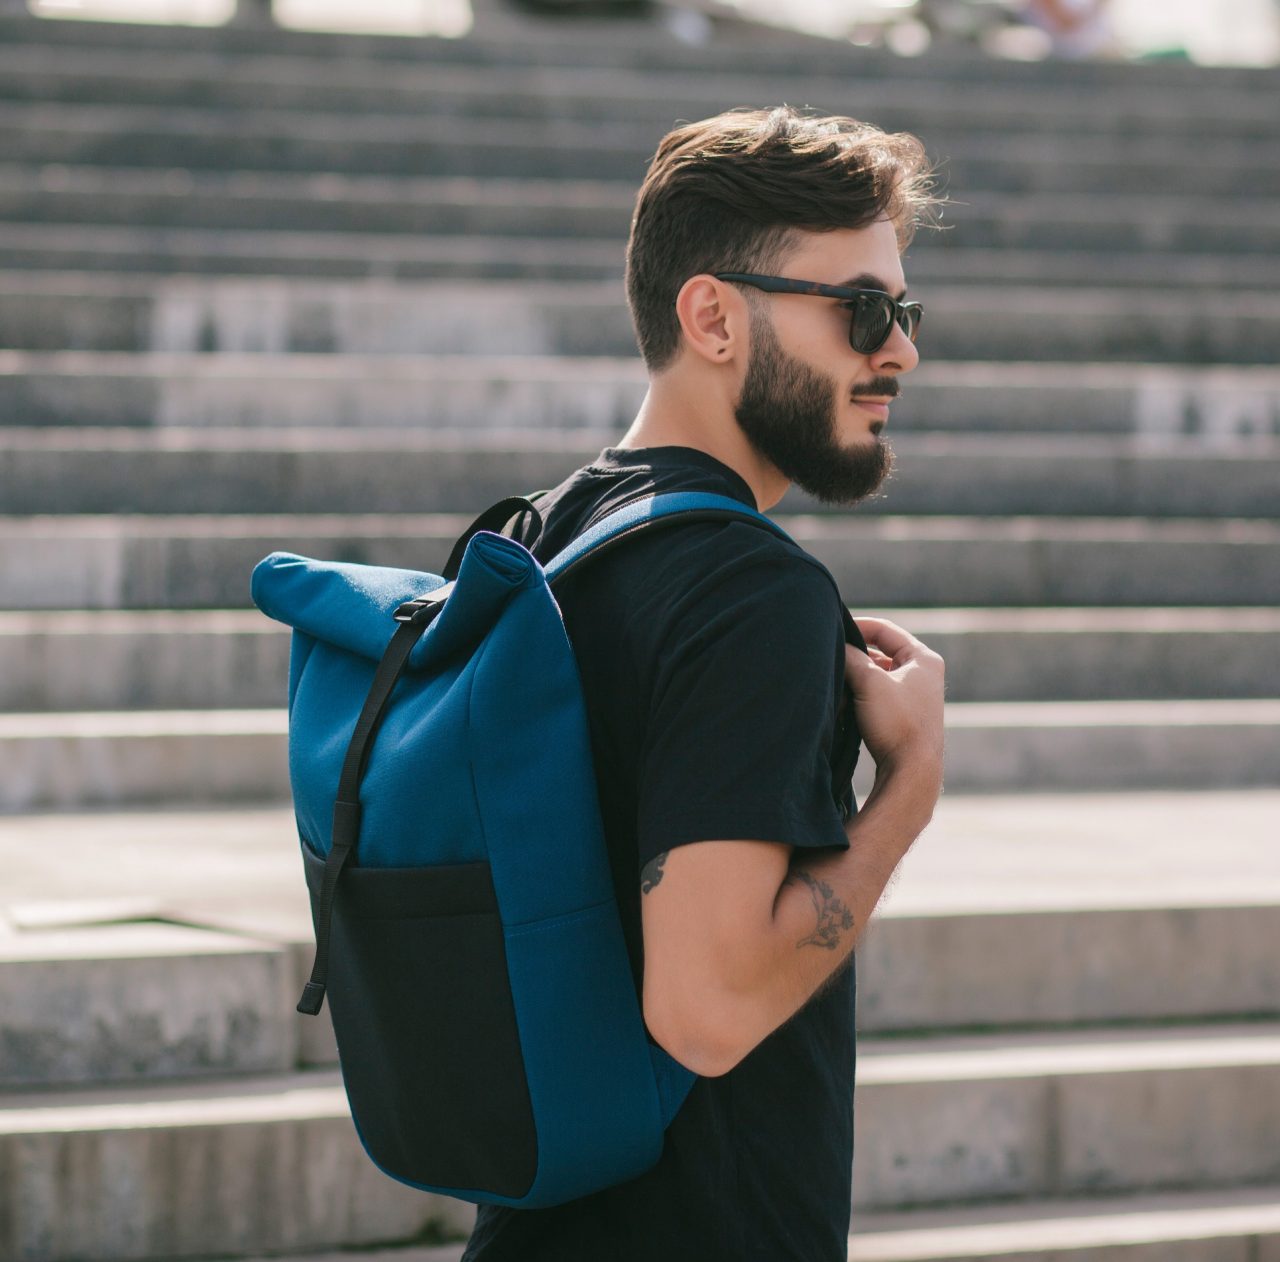 Guy with backpack walking by steps